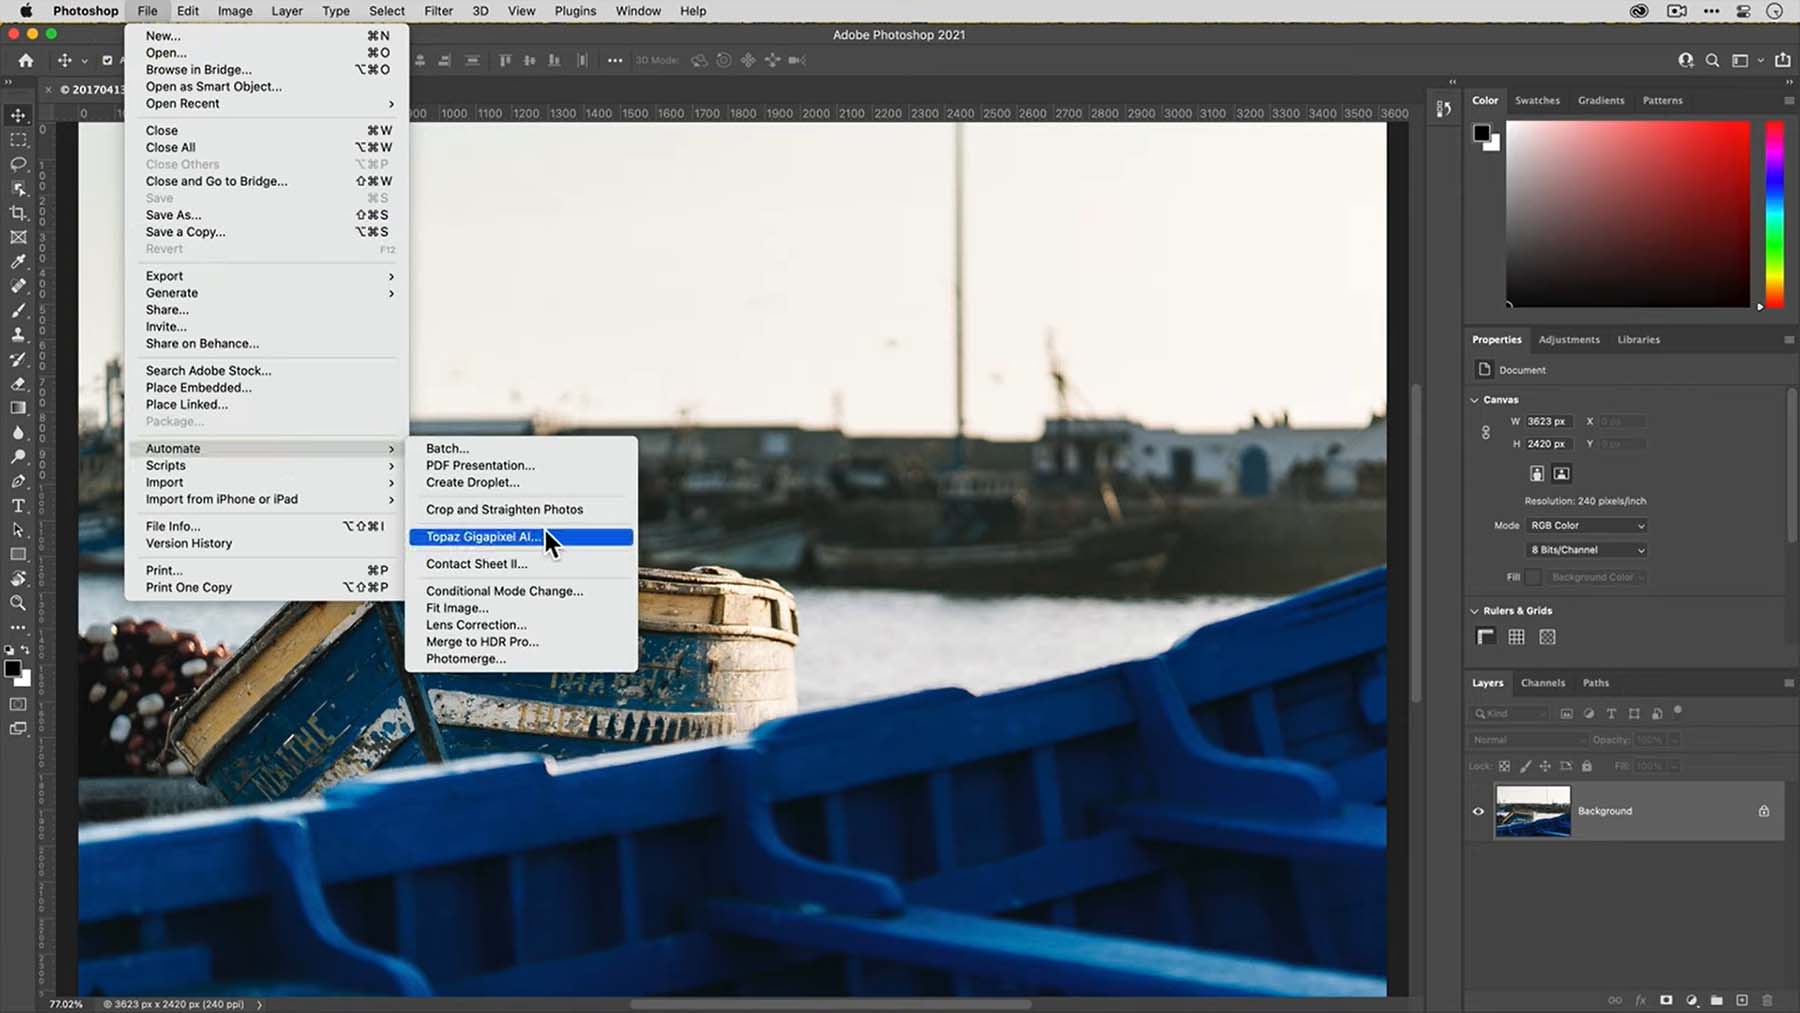 Gigapixel AI and apps within the Adobe Creative Suite